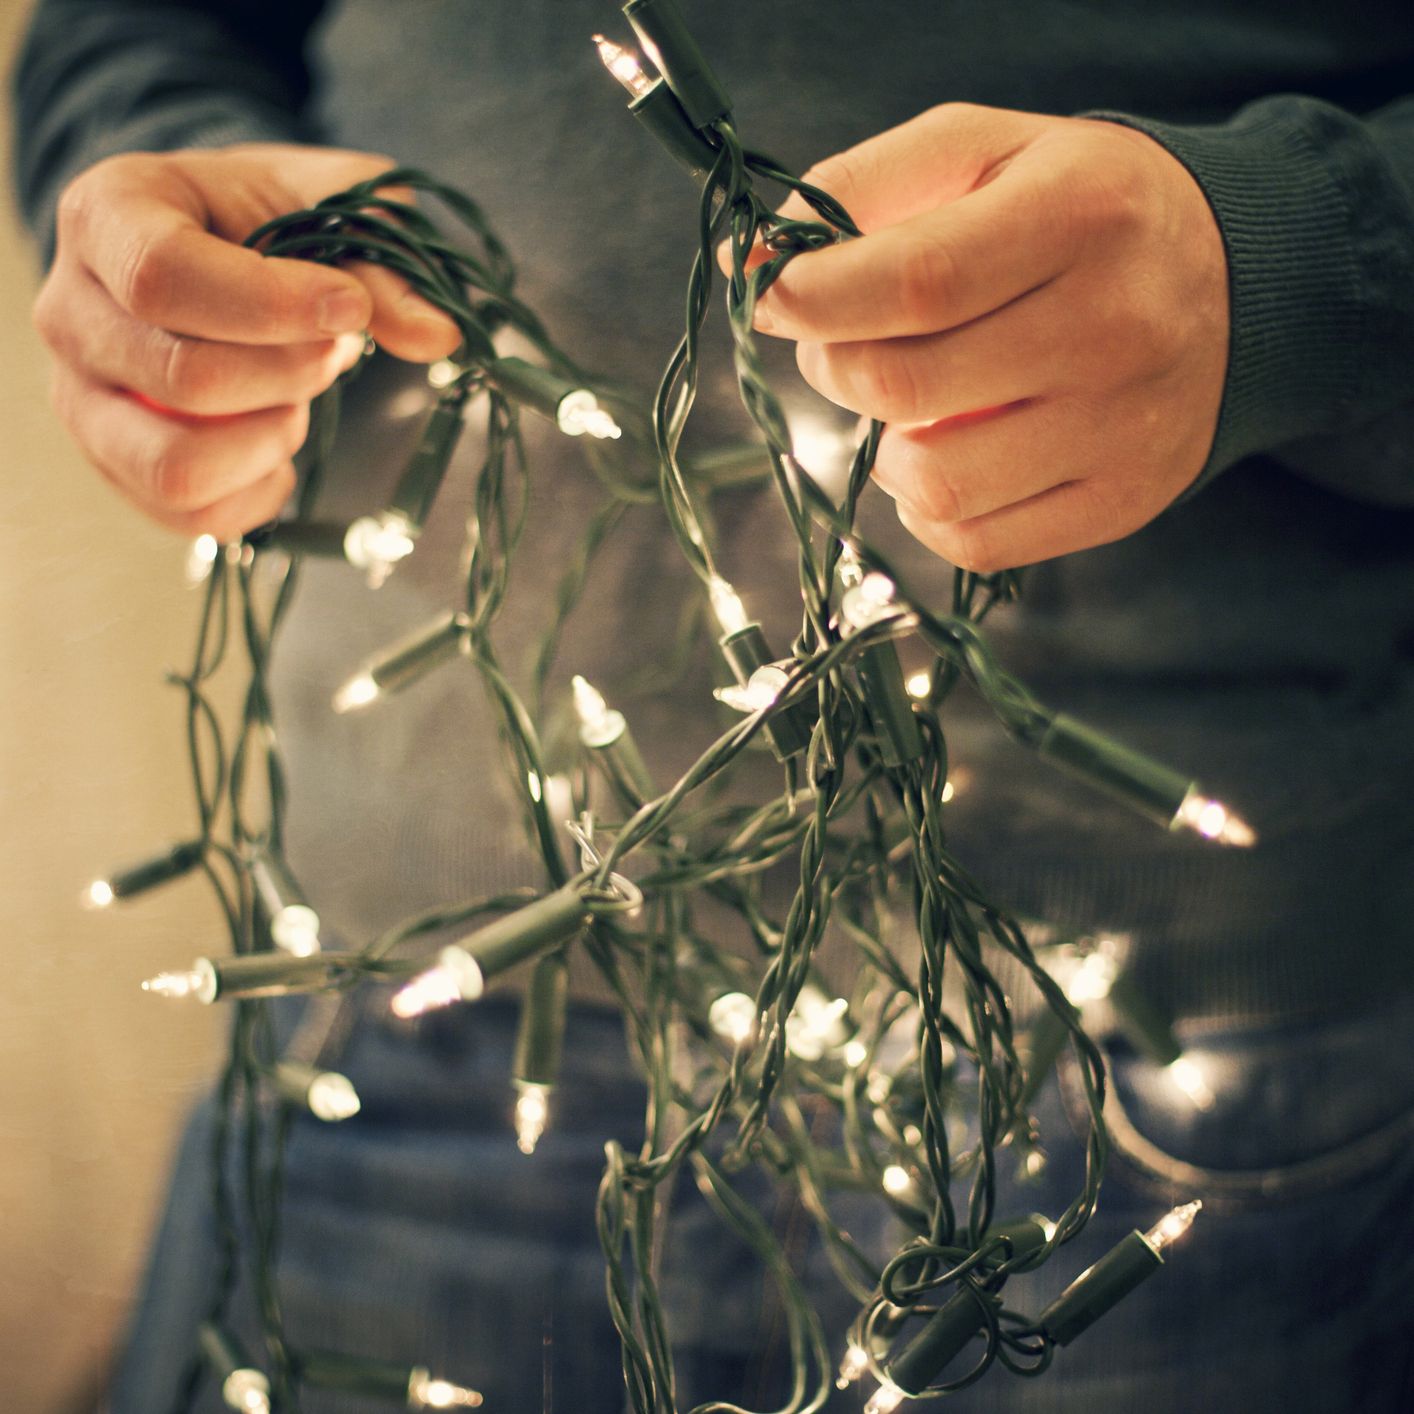 How to Fix a String of Christmas Lights